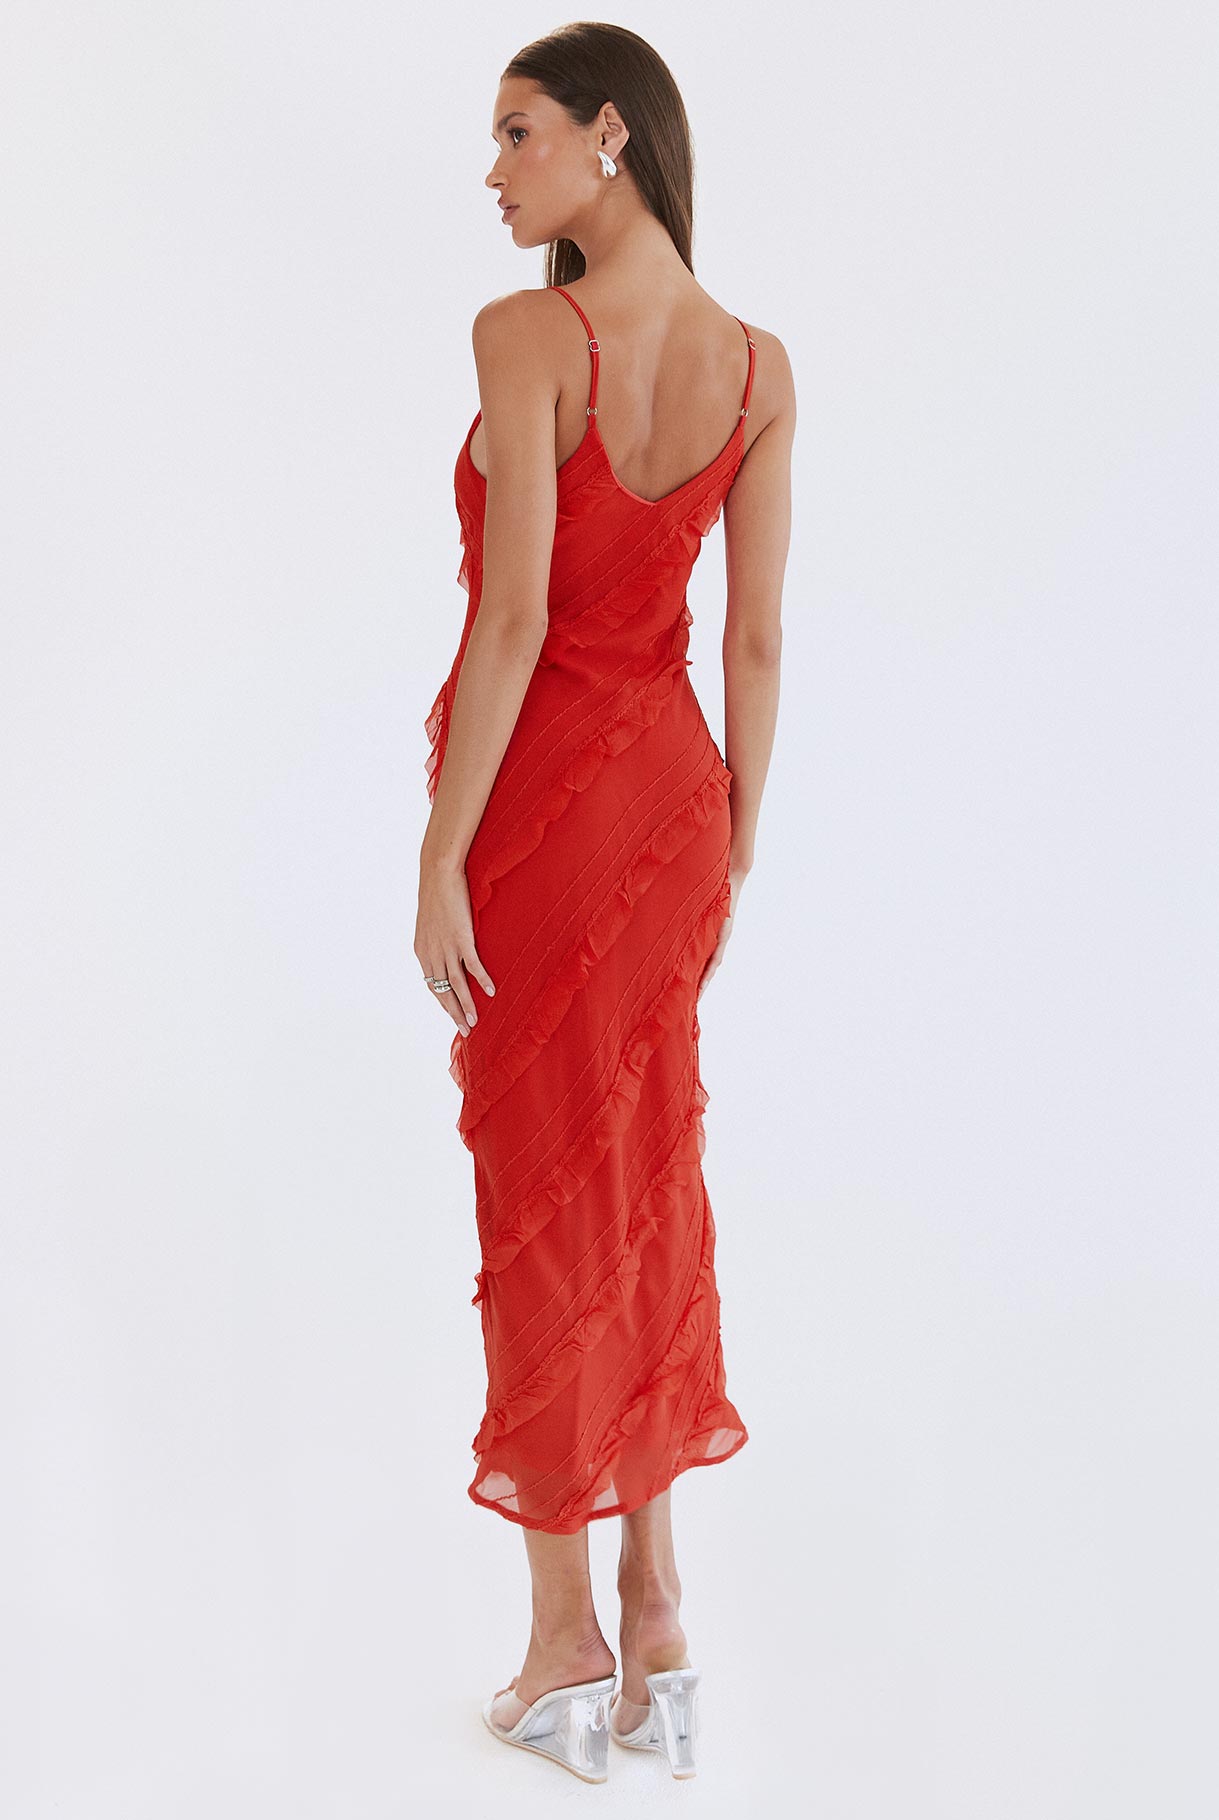 Shop Formal Dress - Lars Maxi Dress Red featured image